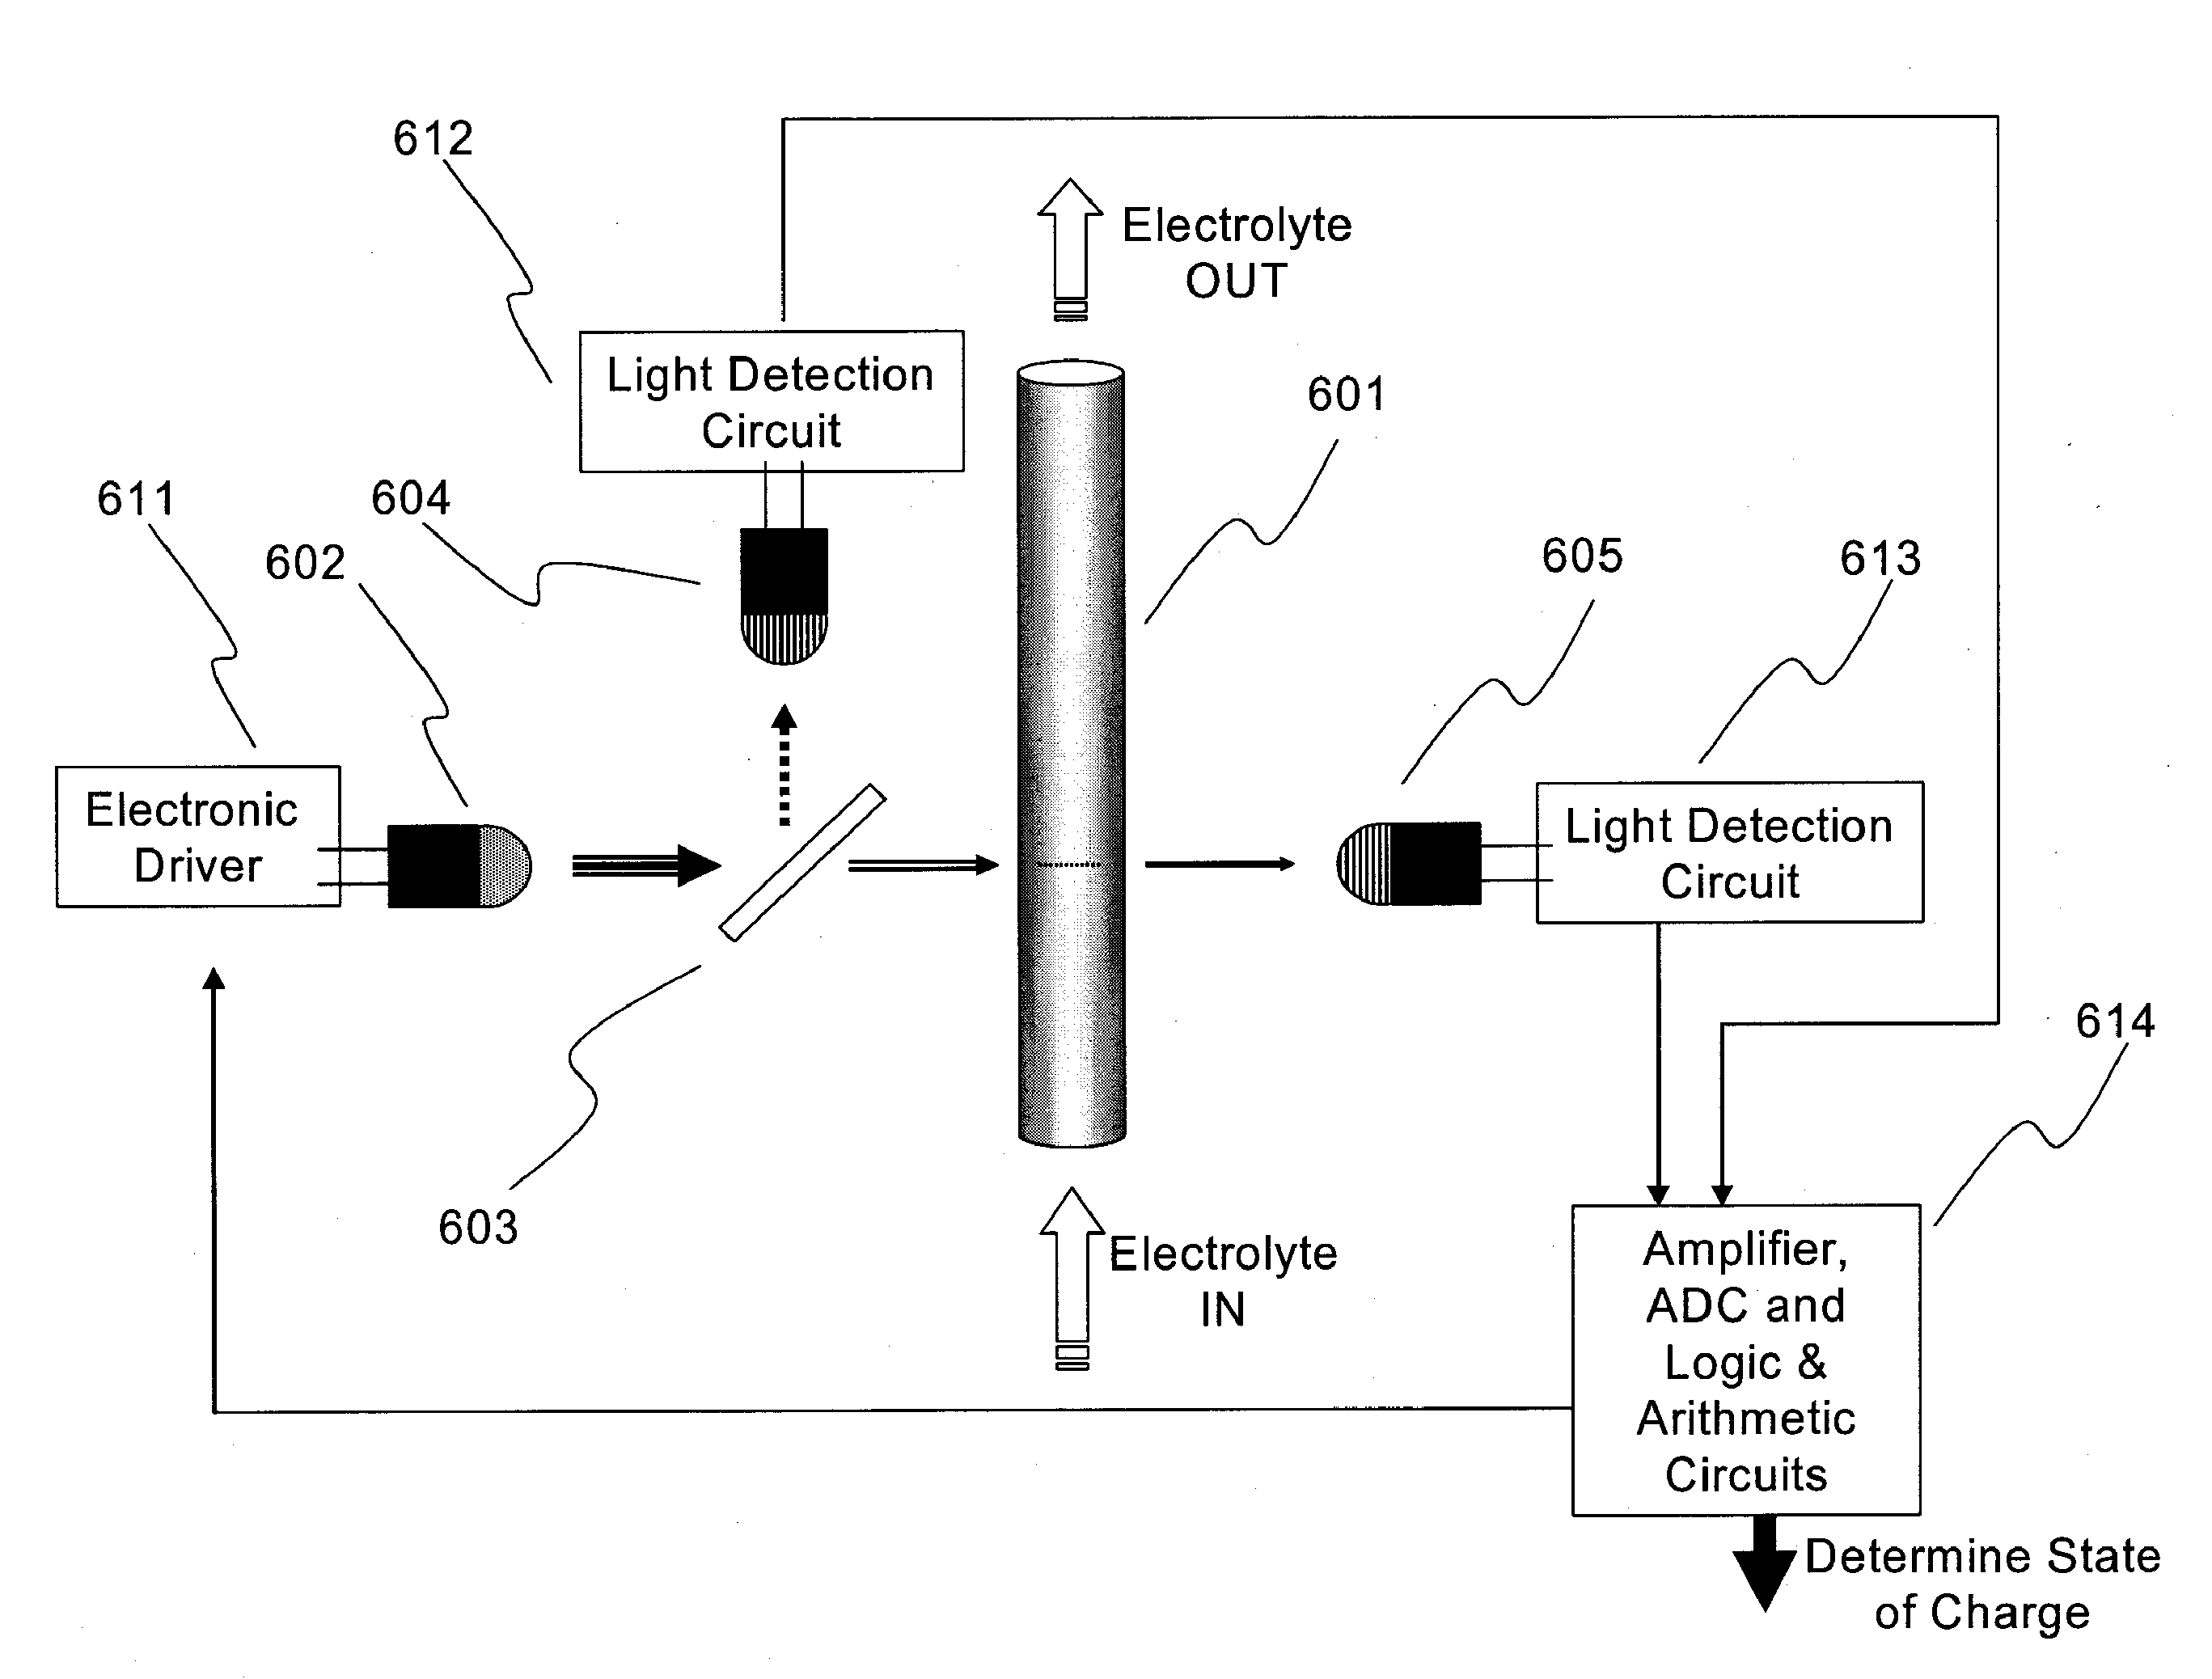 Apparatus and Methods of Determination of State of Charge in a Redox Flow Battery